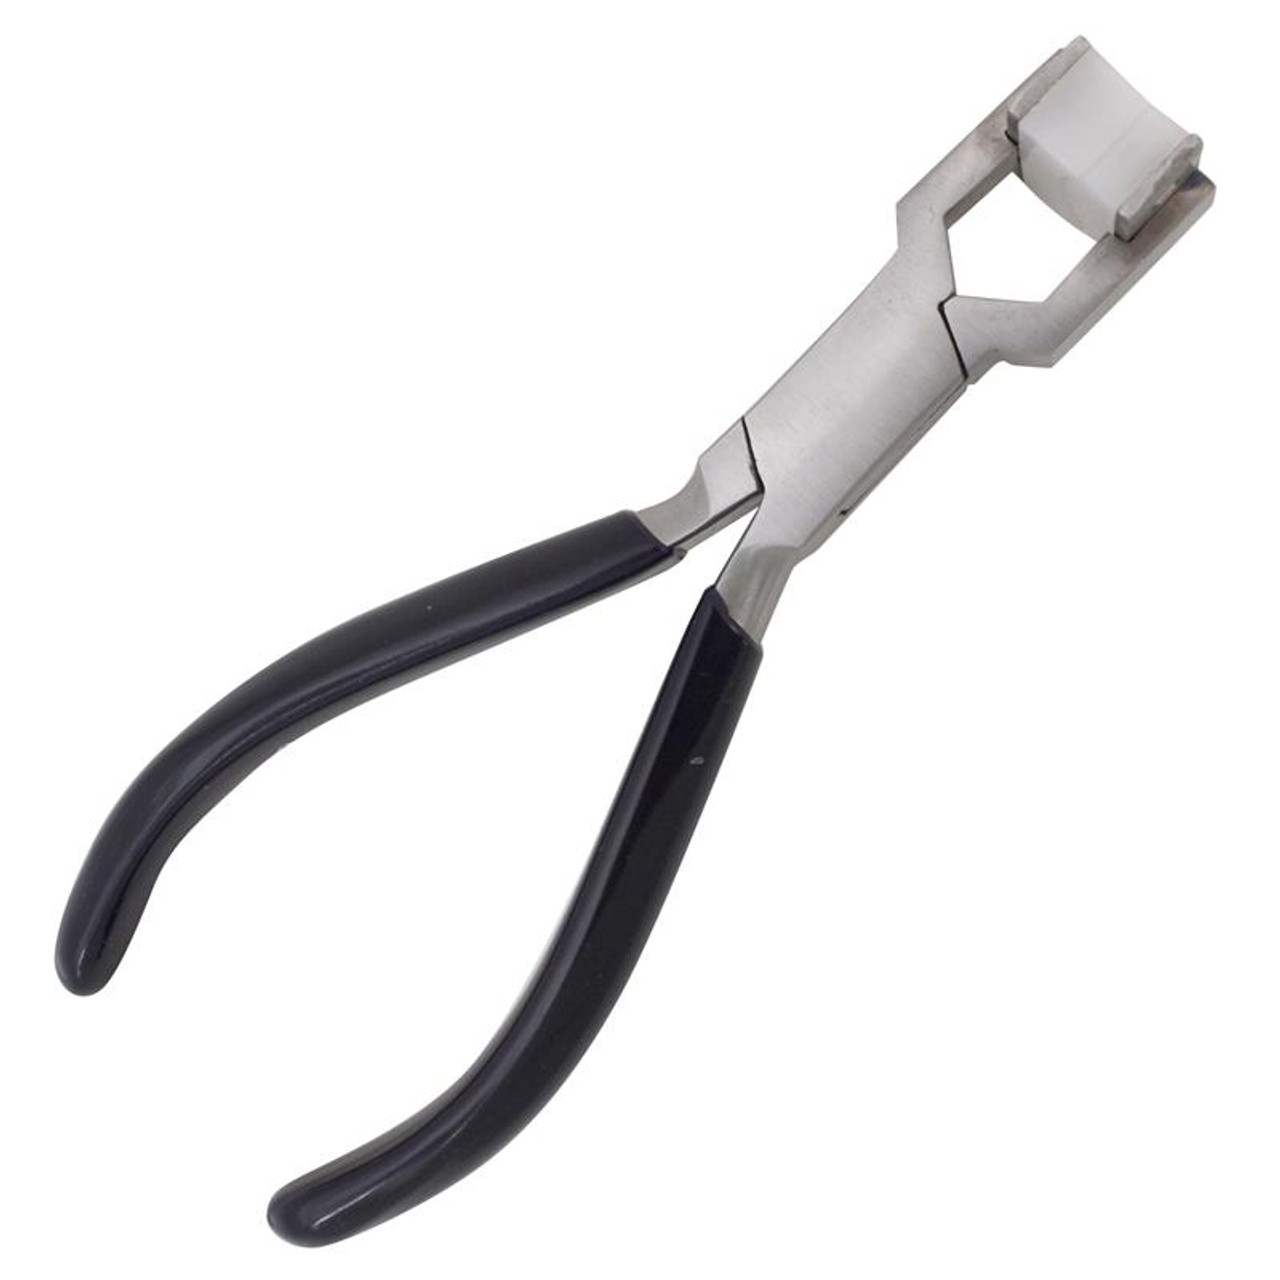 Eurotool Euro Punch Square Pliers 1.5mm